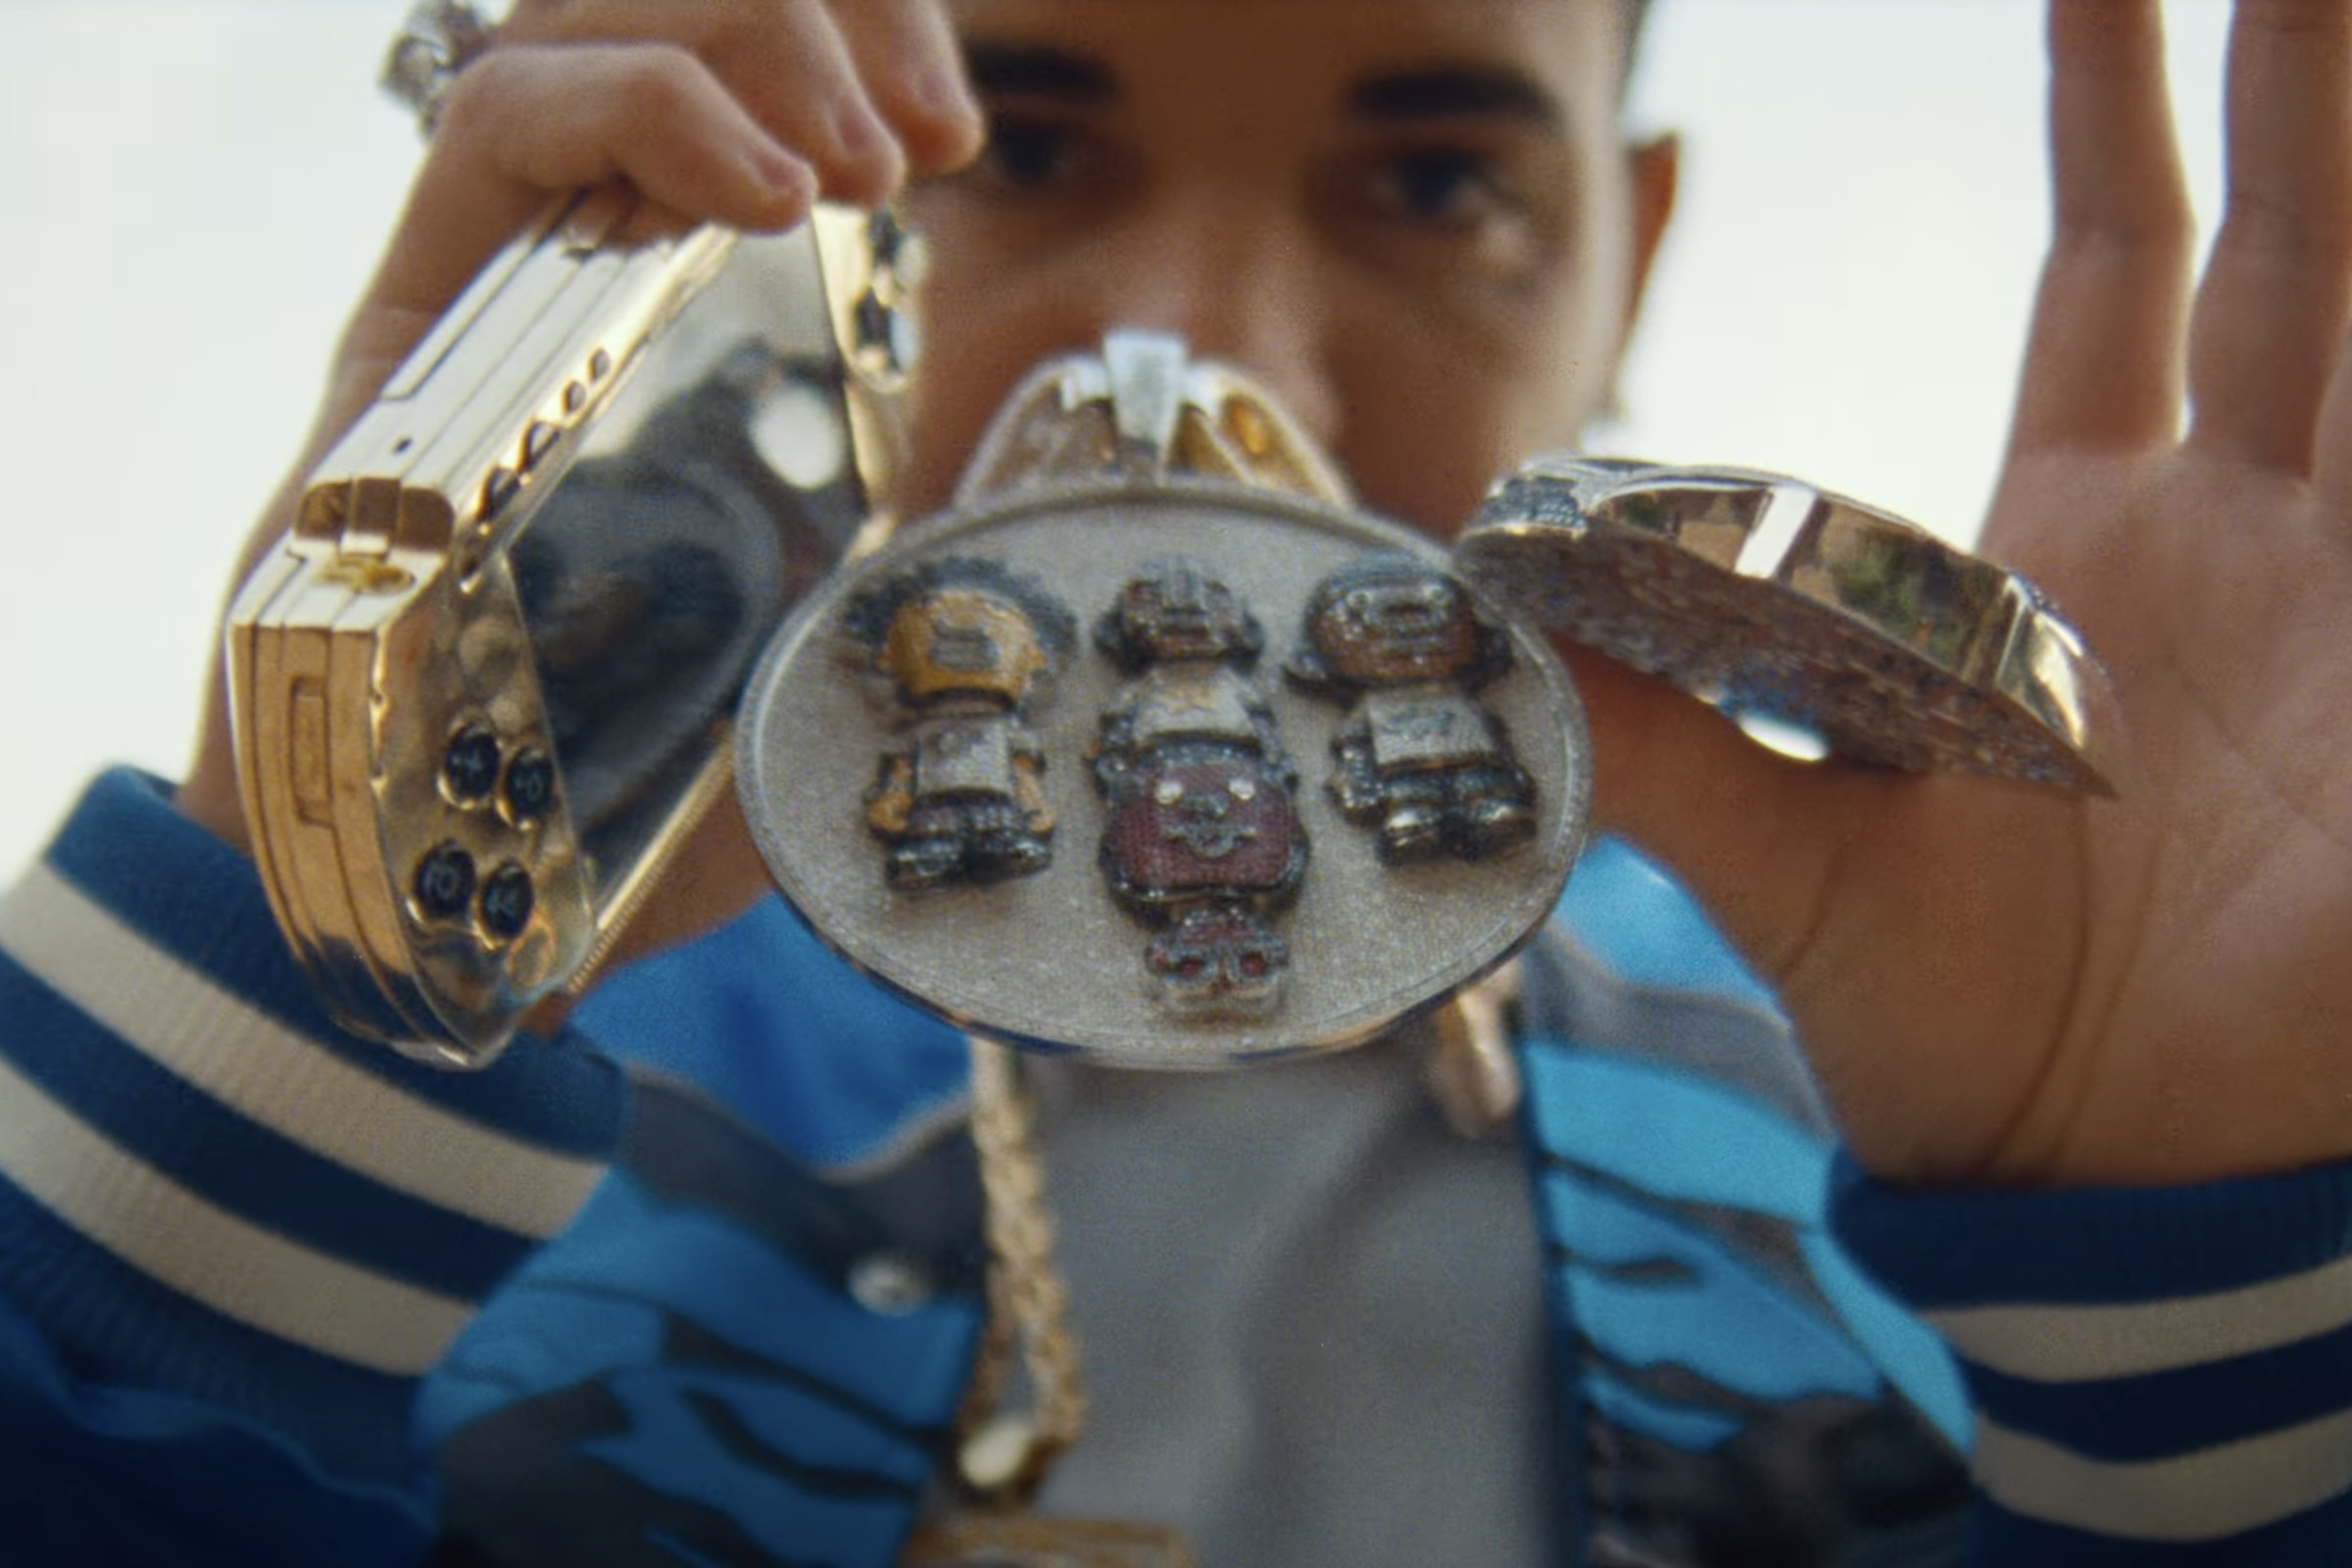 A close-up of a gold PSP and Pharrell Williams’ chains / medallions in the hands of Drake, who is holding it all right in front of his face.